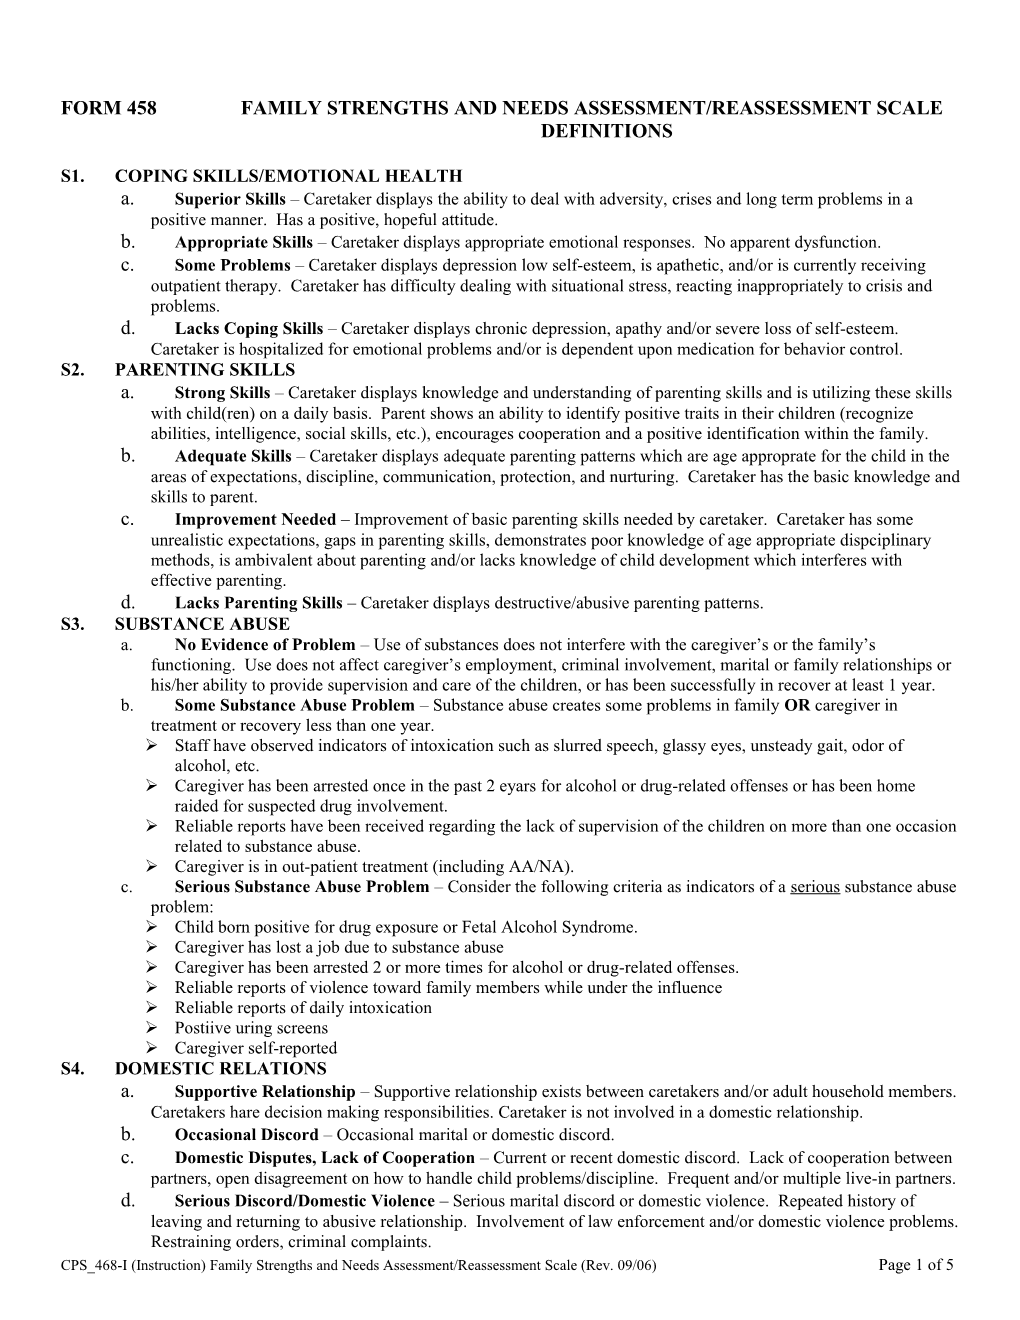 Form 458 Family Strengths and Needs Assessment/Reassessment Scale Definitions